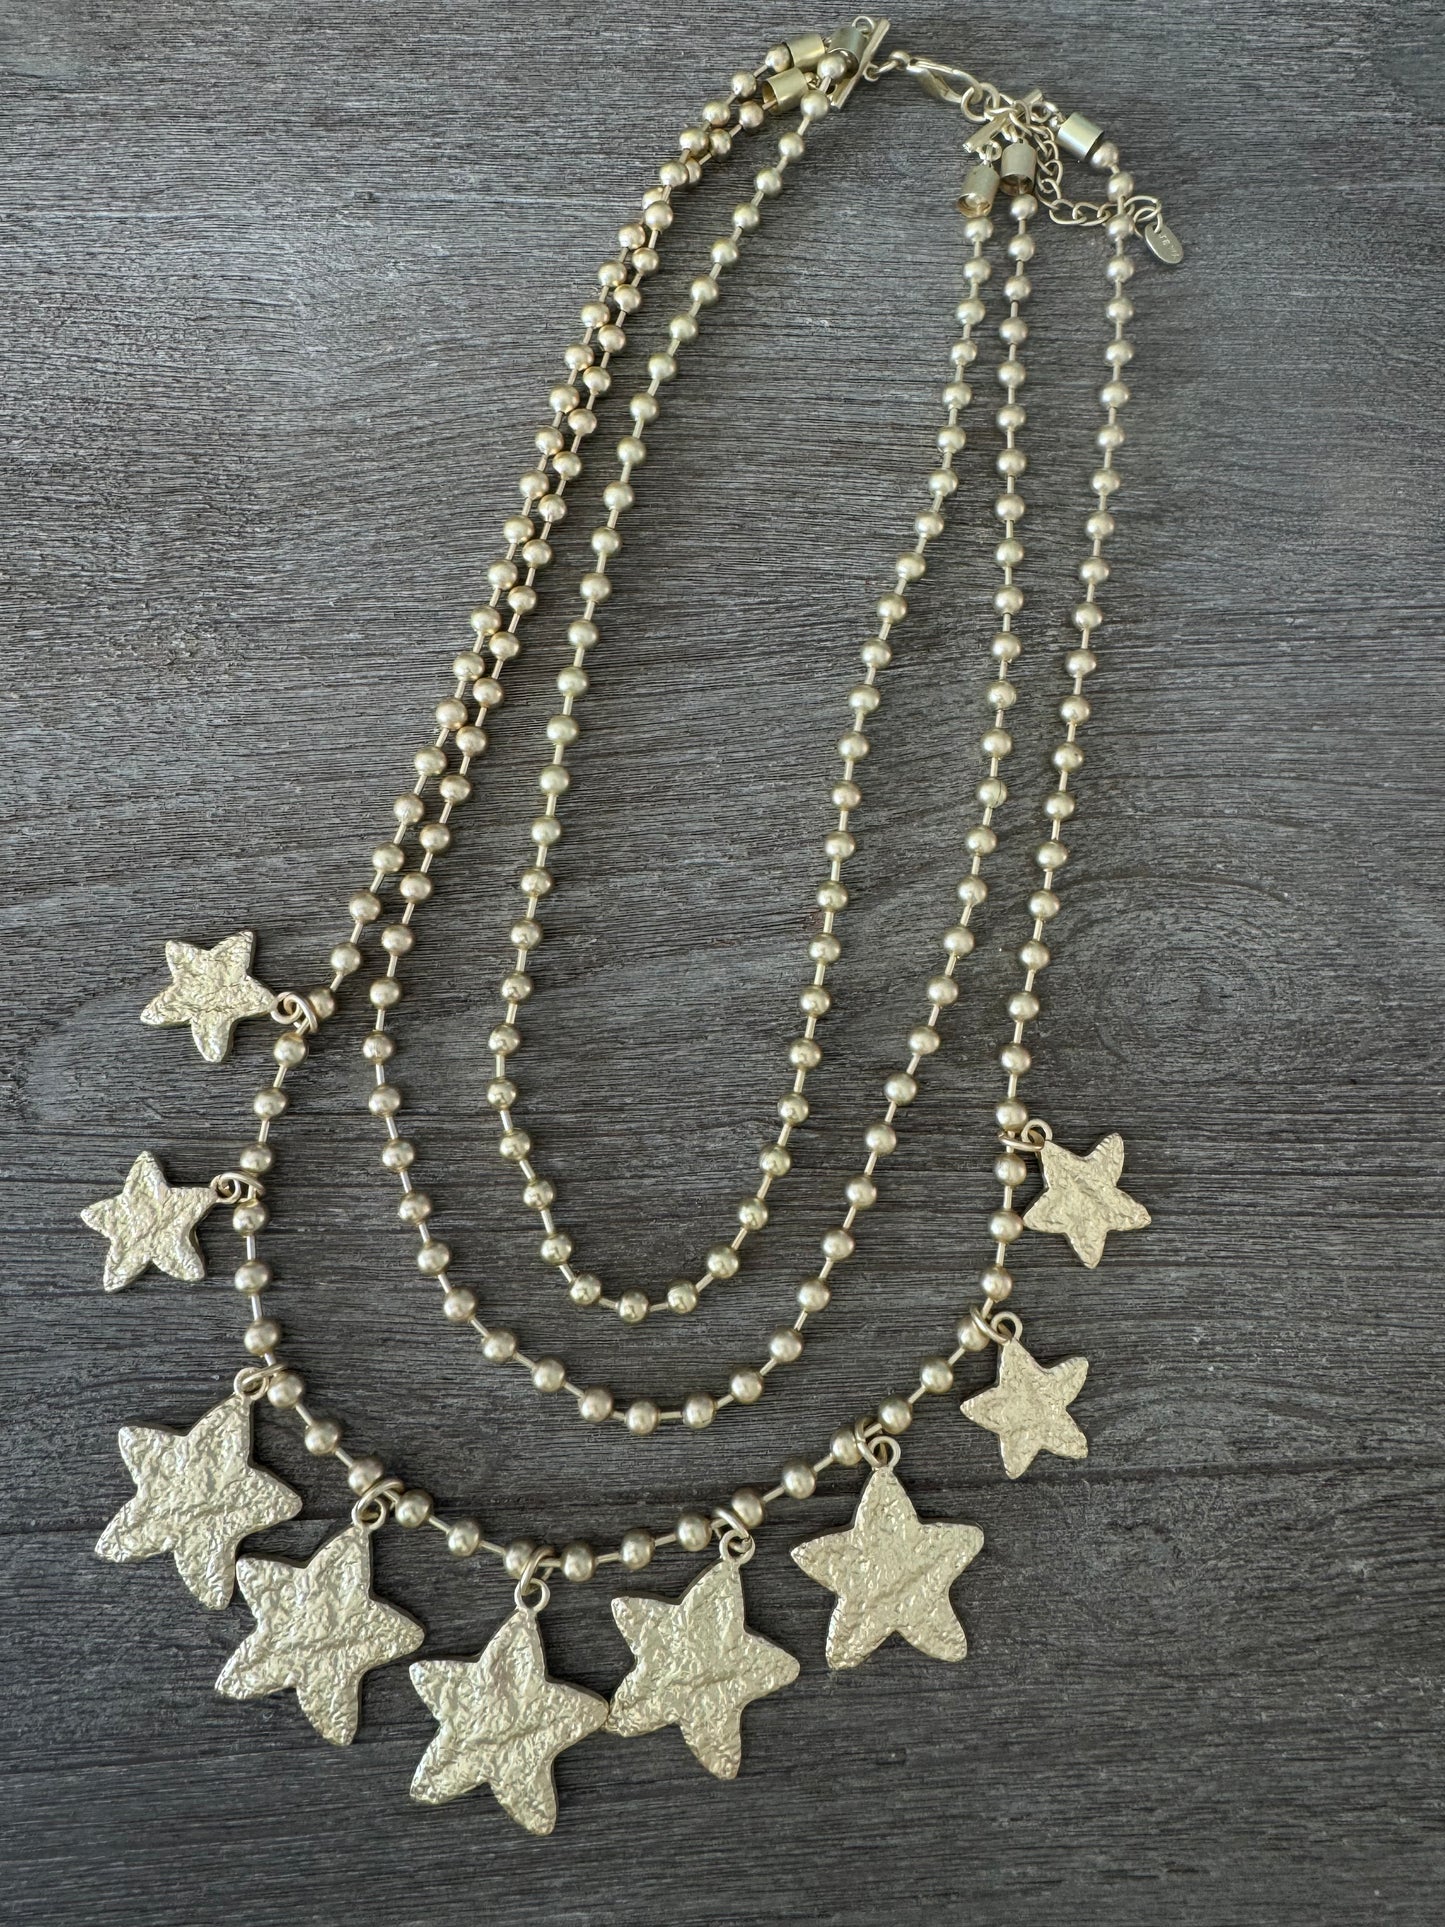 3 Layers Hanging Star Gold Turkish Necklace